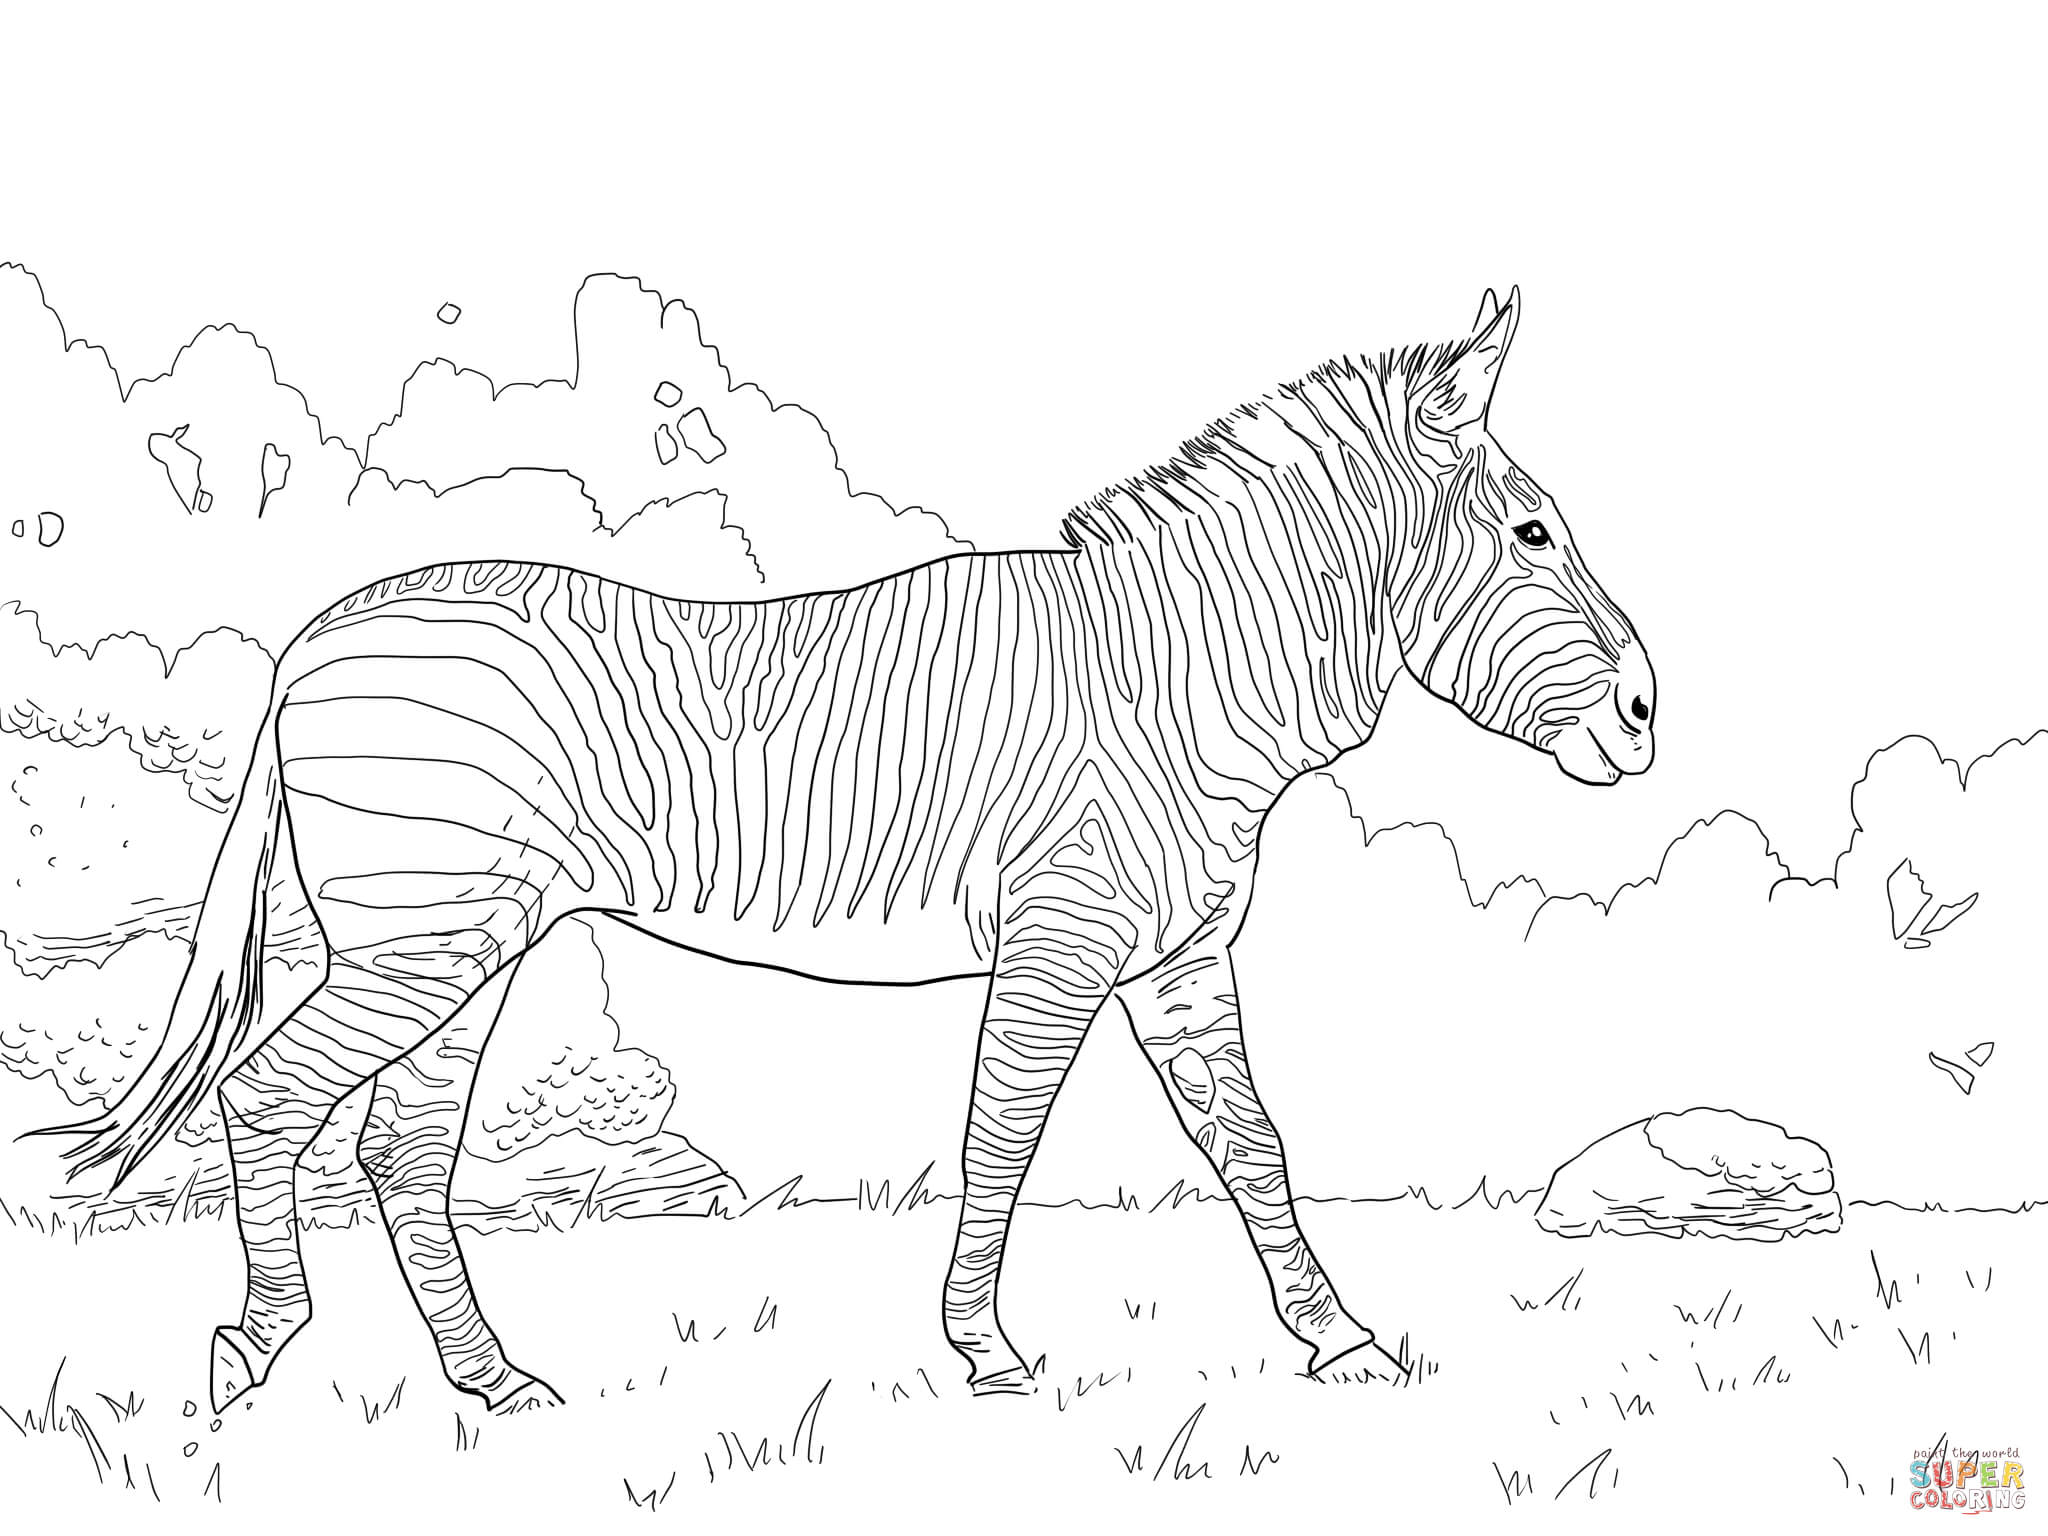 Zebras coloring pages | Free Coloring Pages